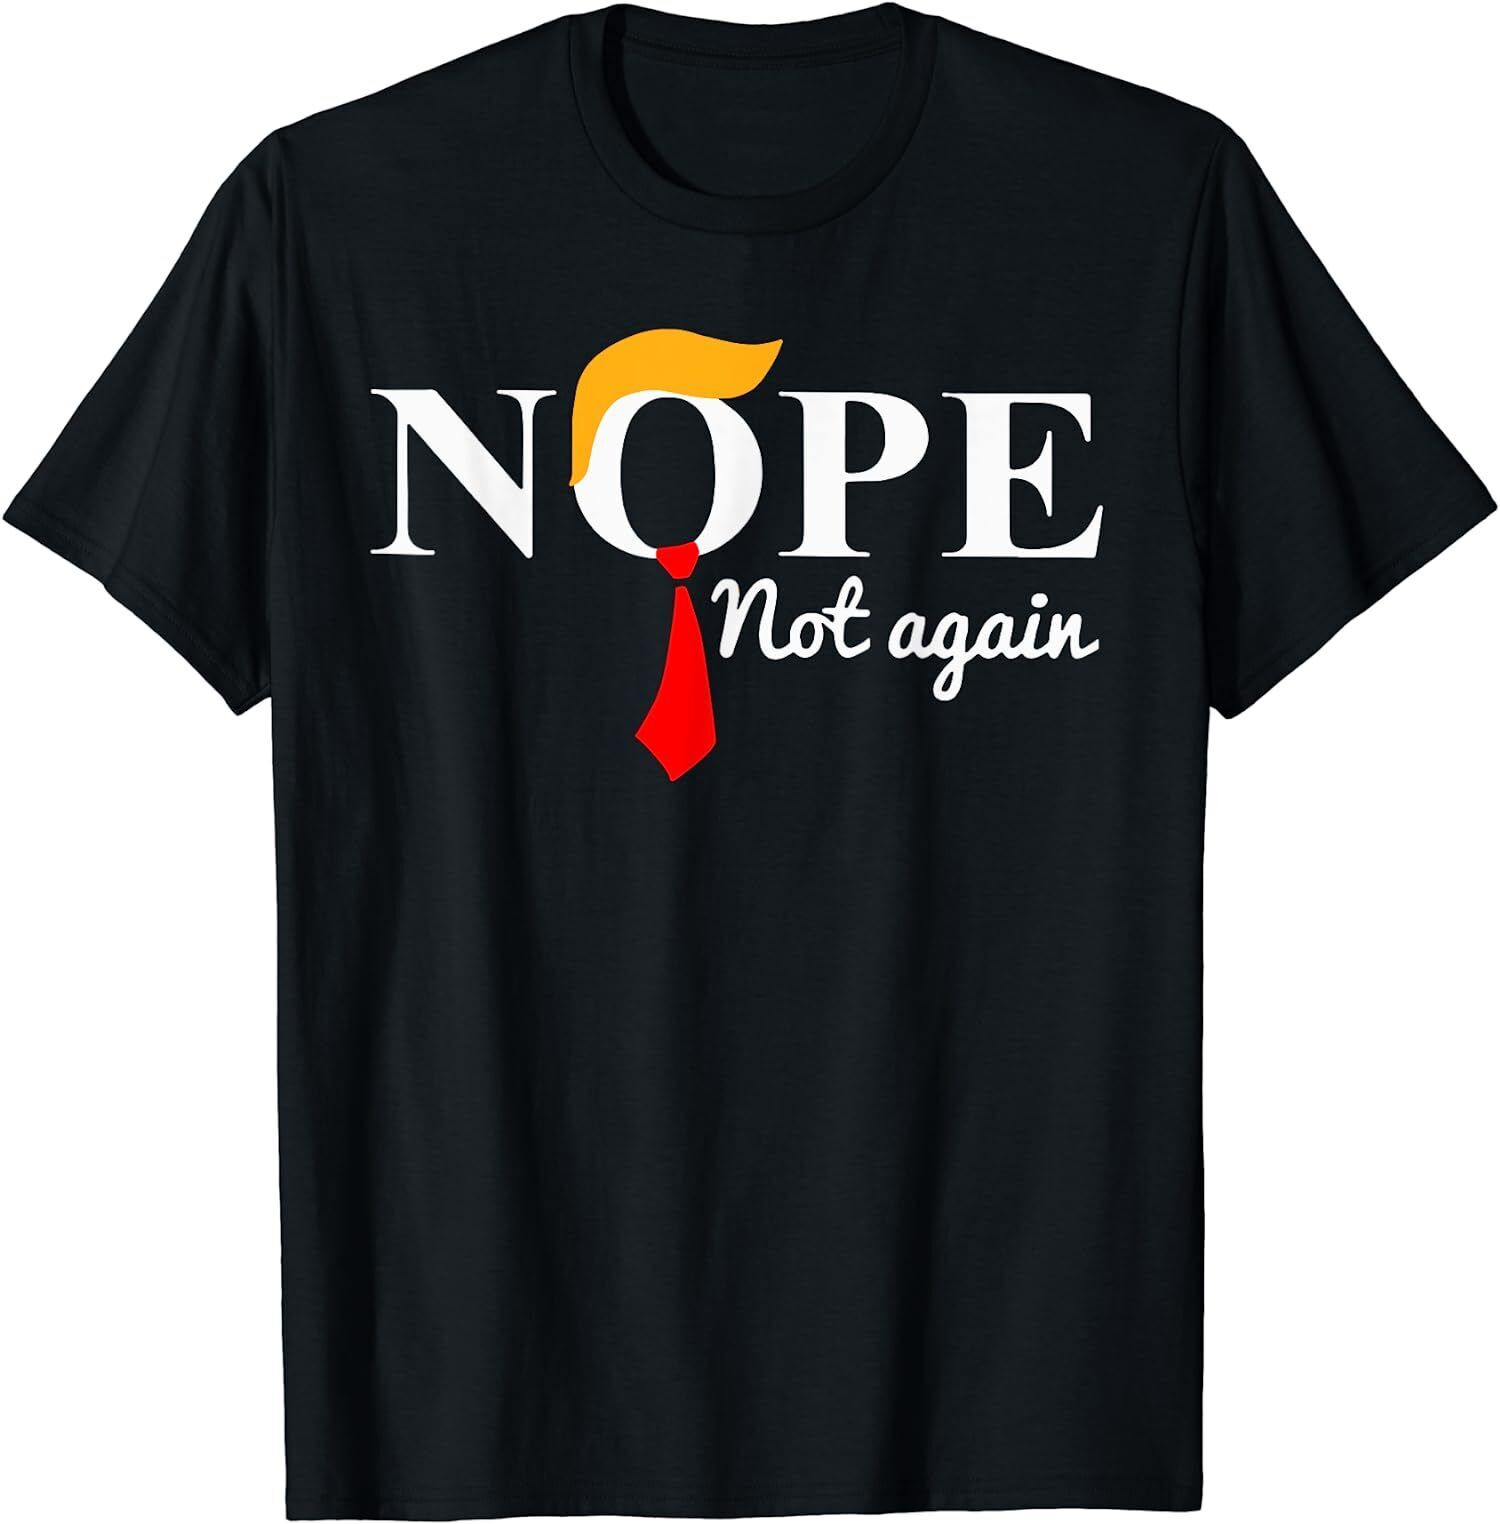 HOT SALE  Nope Not Again Funny Trump USA  T-Shirt, Size S-5XL, FREESHIP